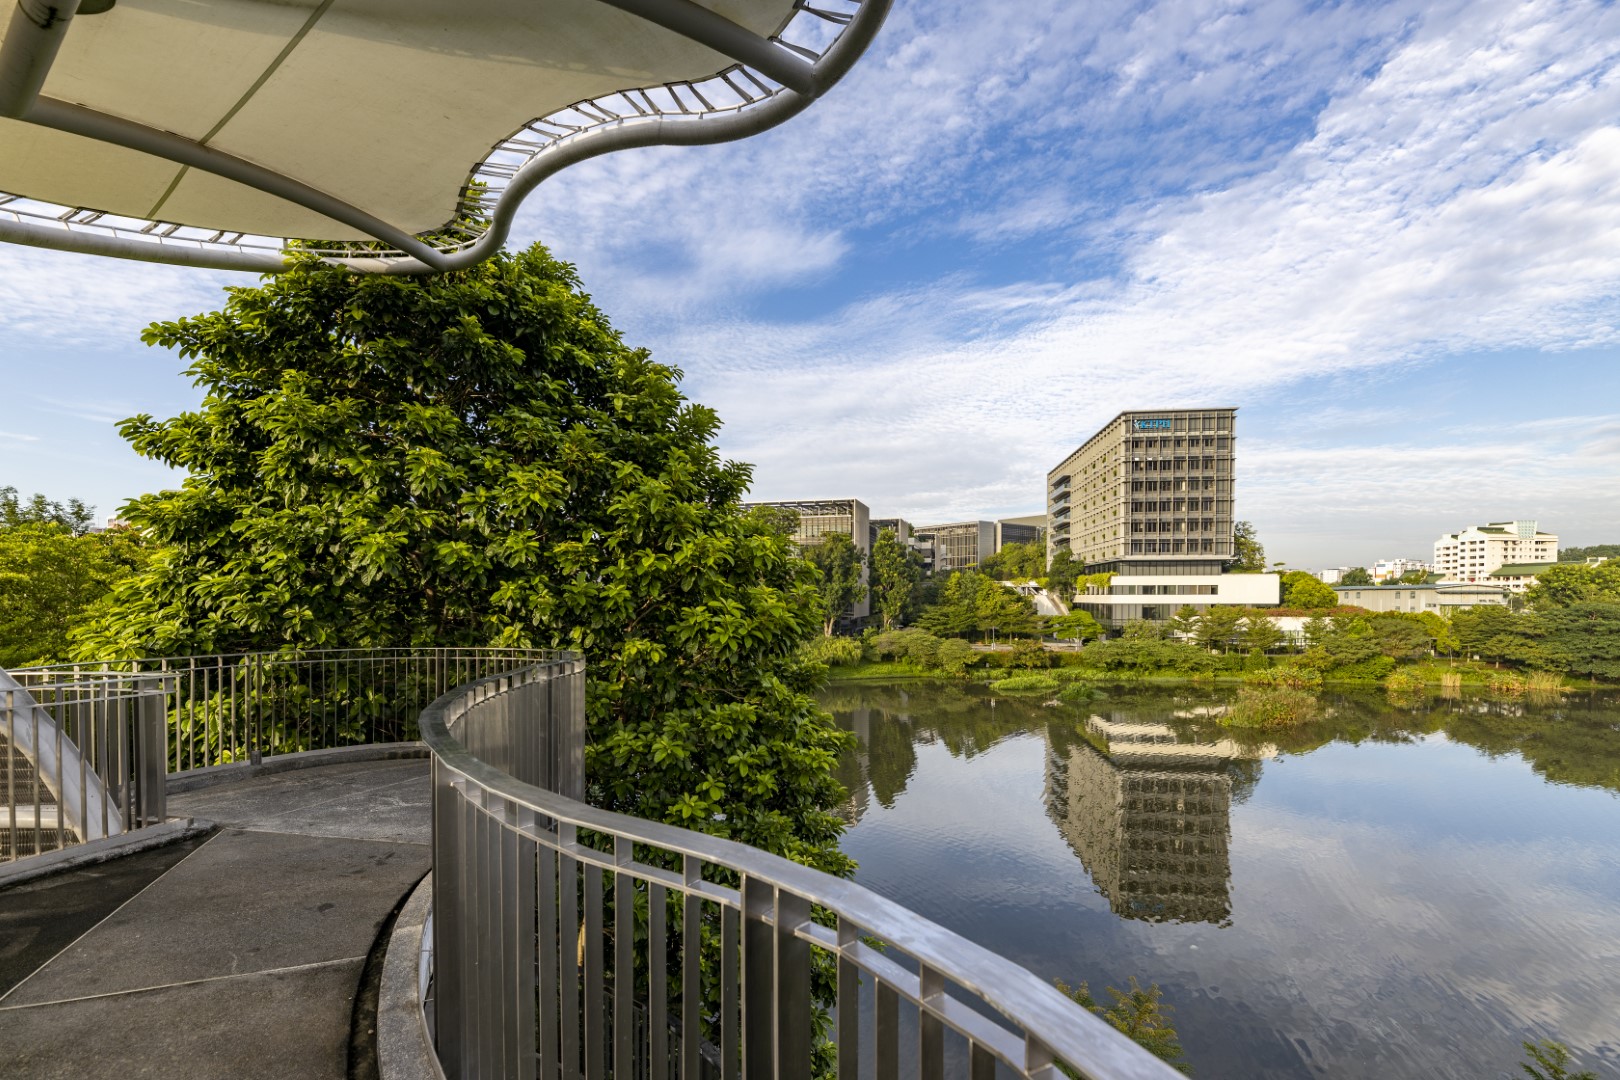 Opening up to the adjacent Yishun Pond, Khoo Teck Puat Hospital was designed to embrace nature and nurture a healing environment